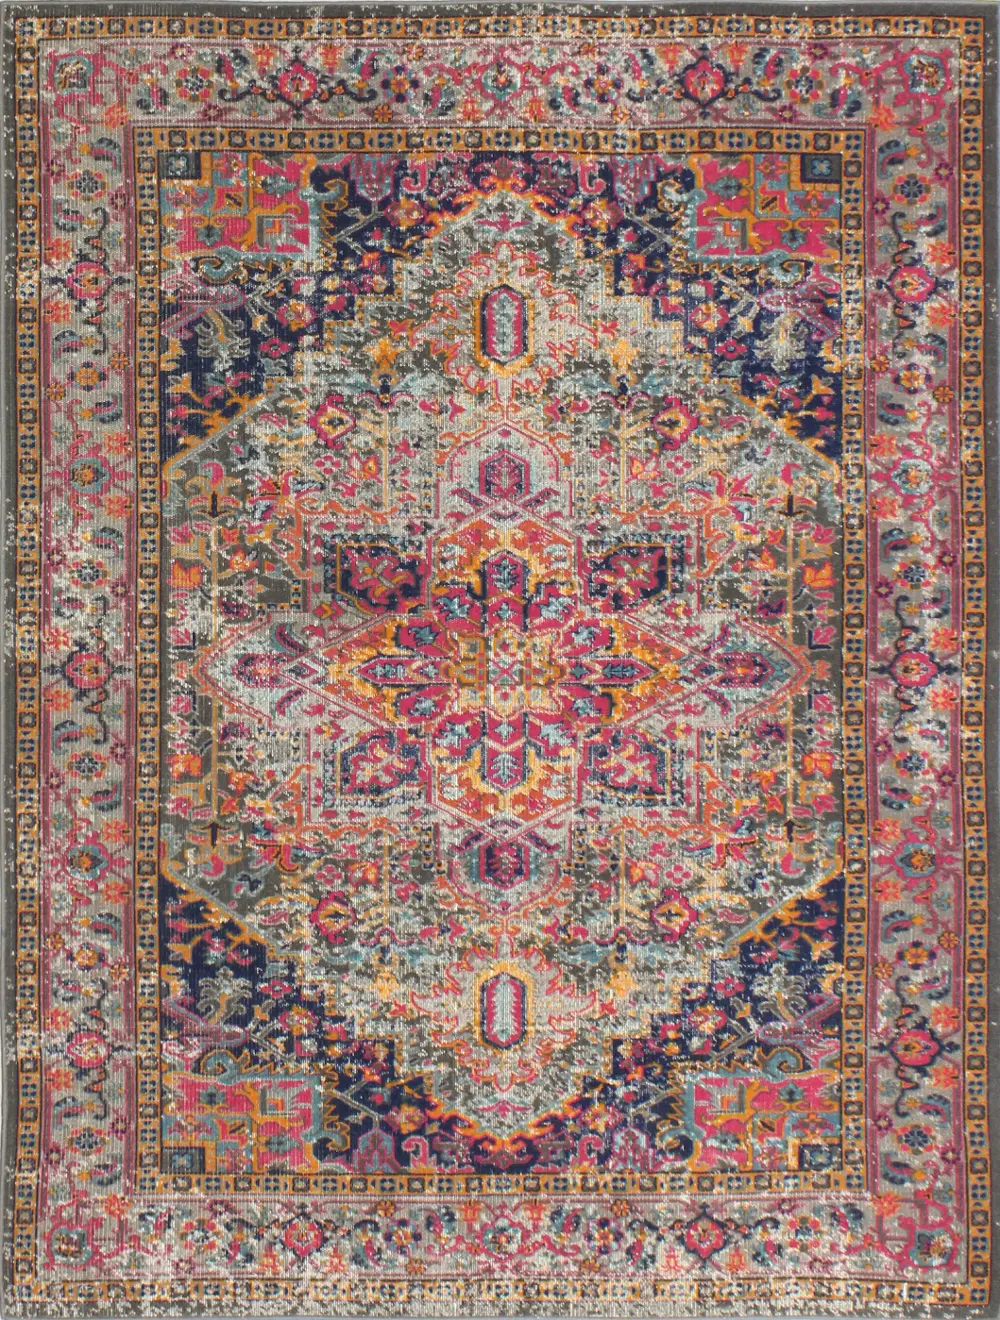 H114-GY-76X96-Z034 8 x 10 Large Traditional Blake Fuschia and Blue Rug - Heritage-1